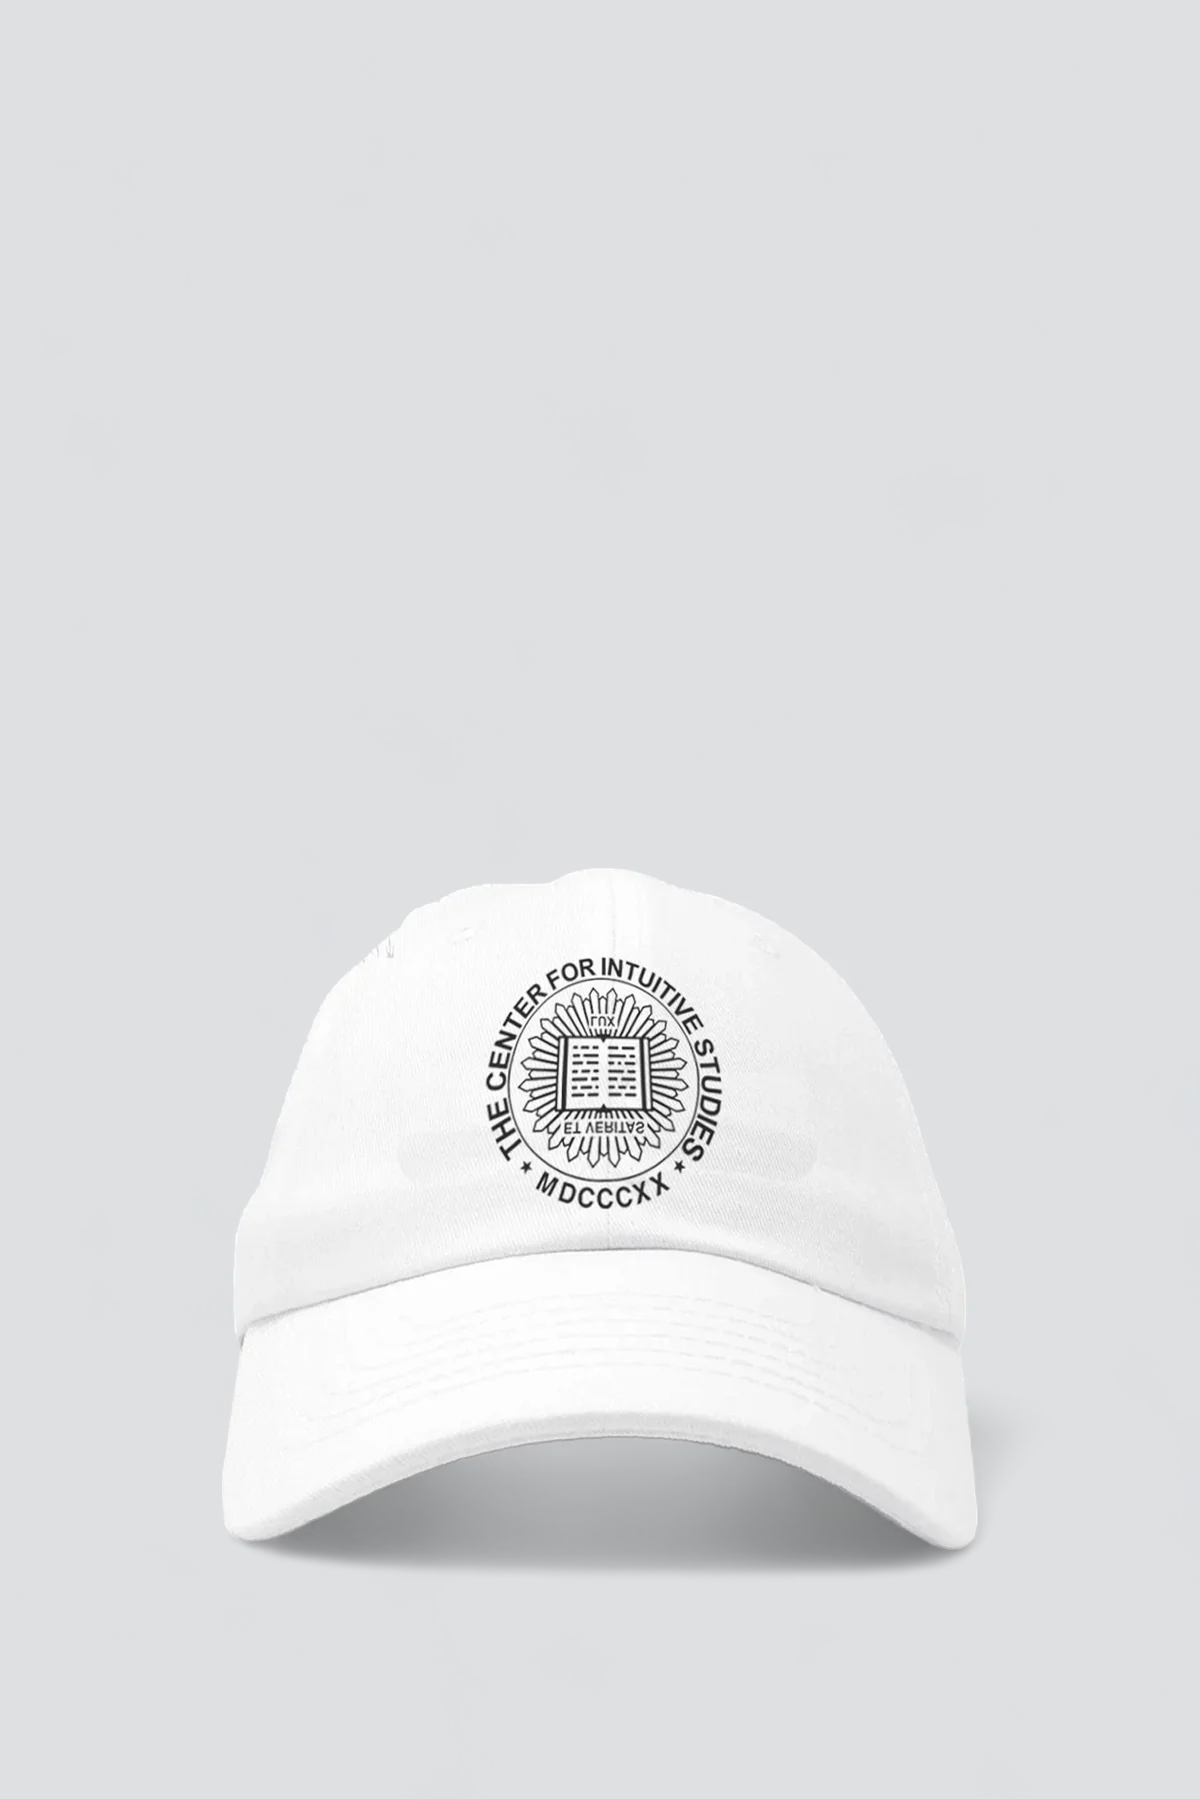 The Center for Intuitive Studies Circle Logo Hat - White/Black